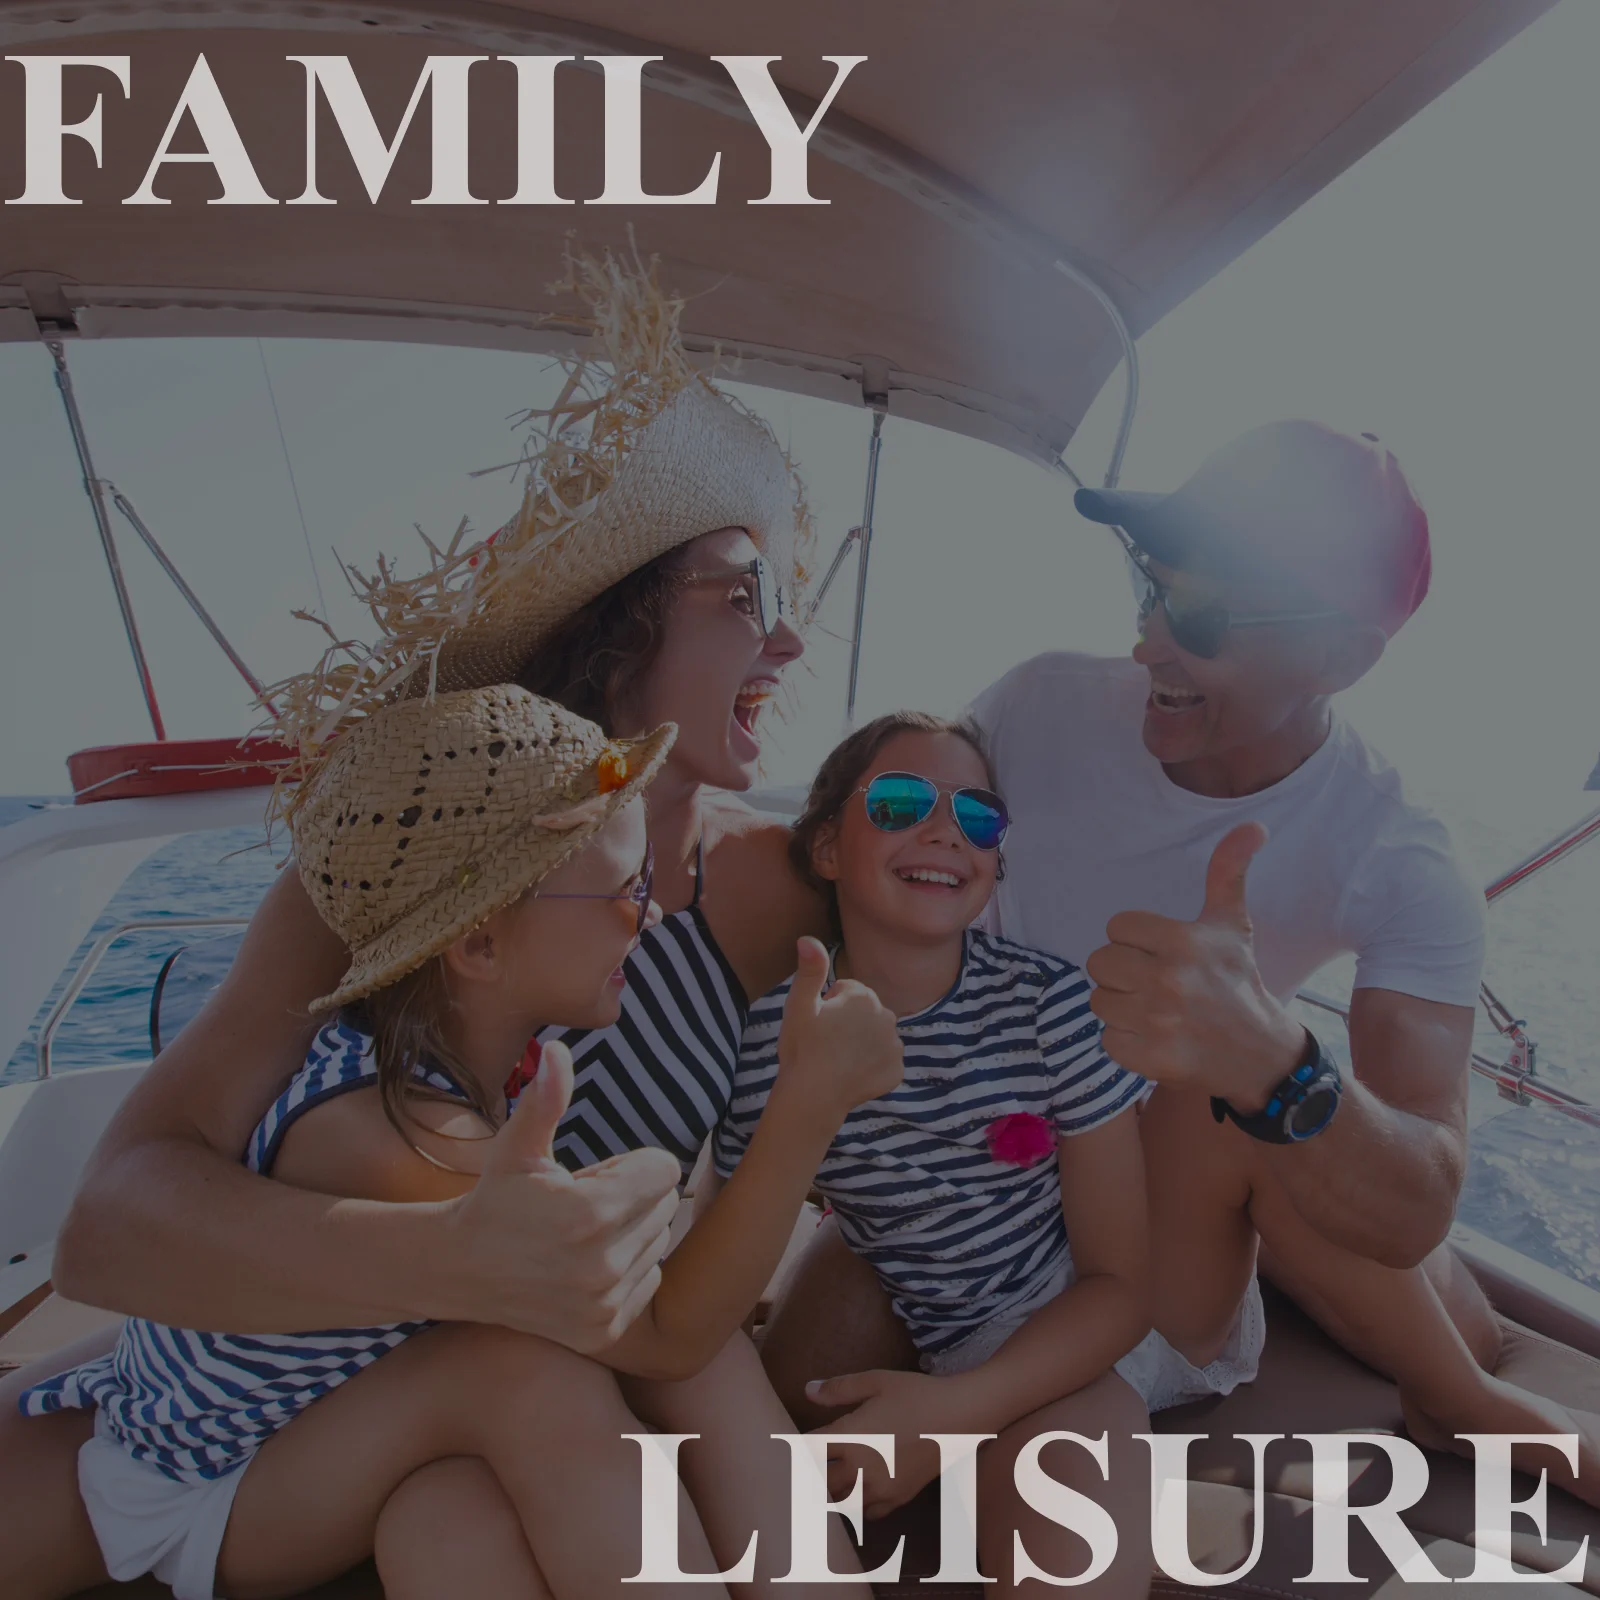 Family leisure on a yacht